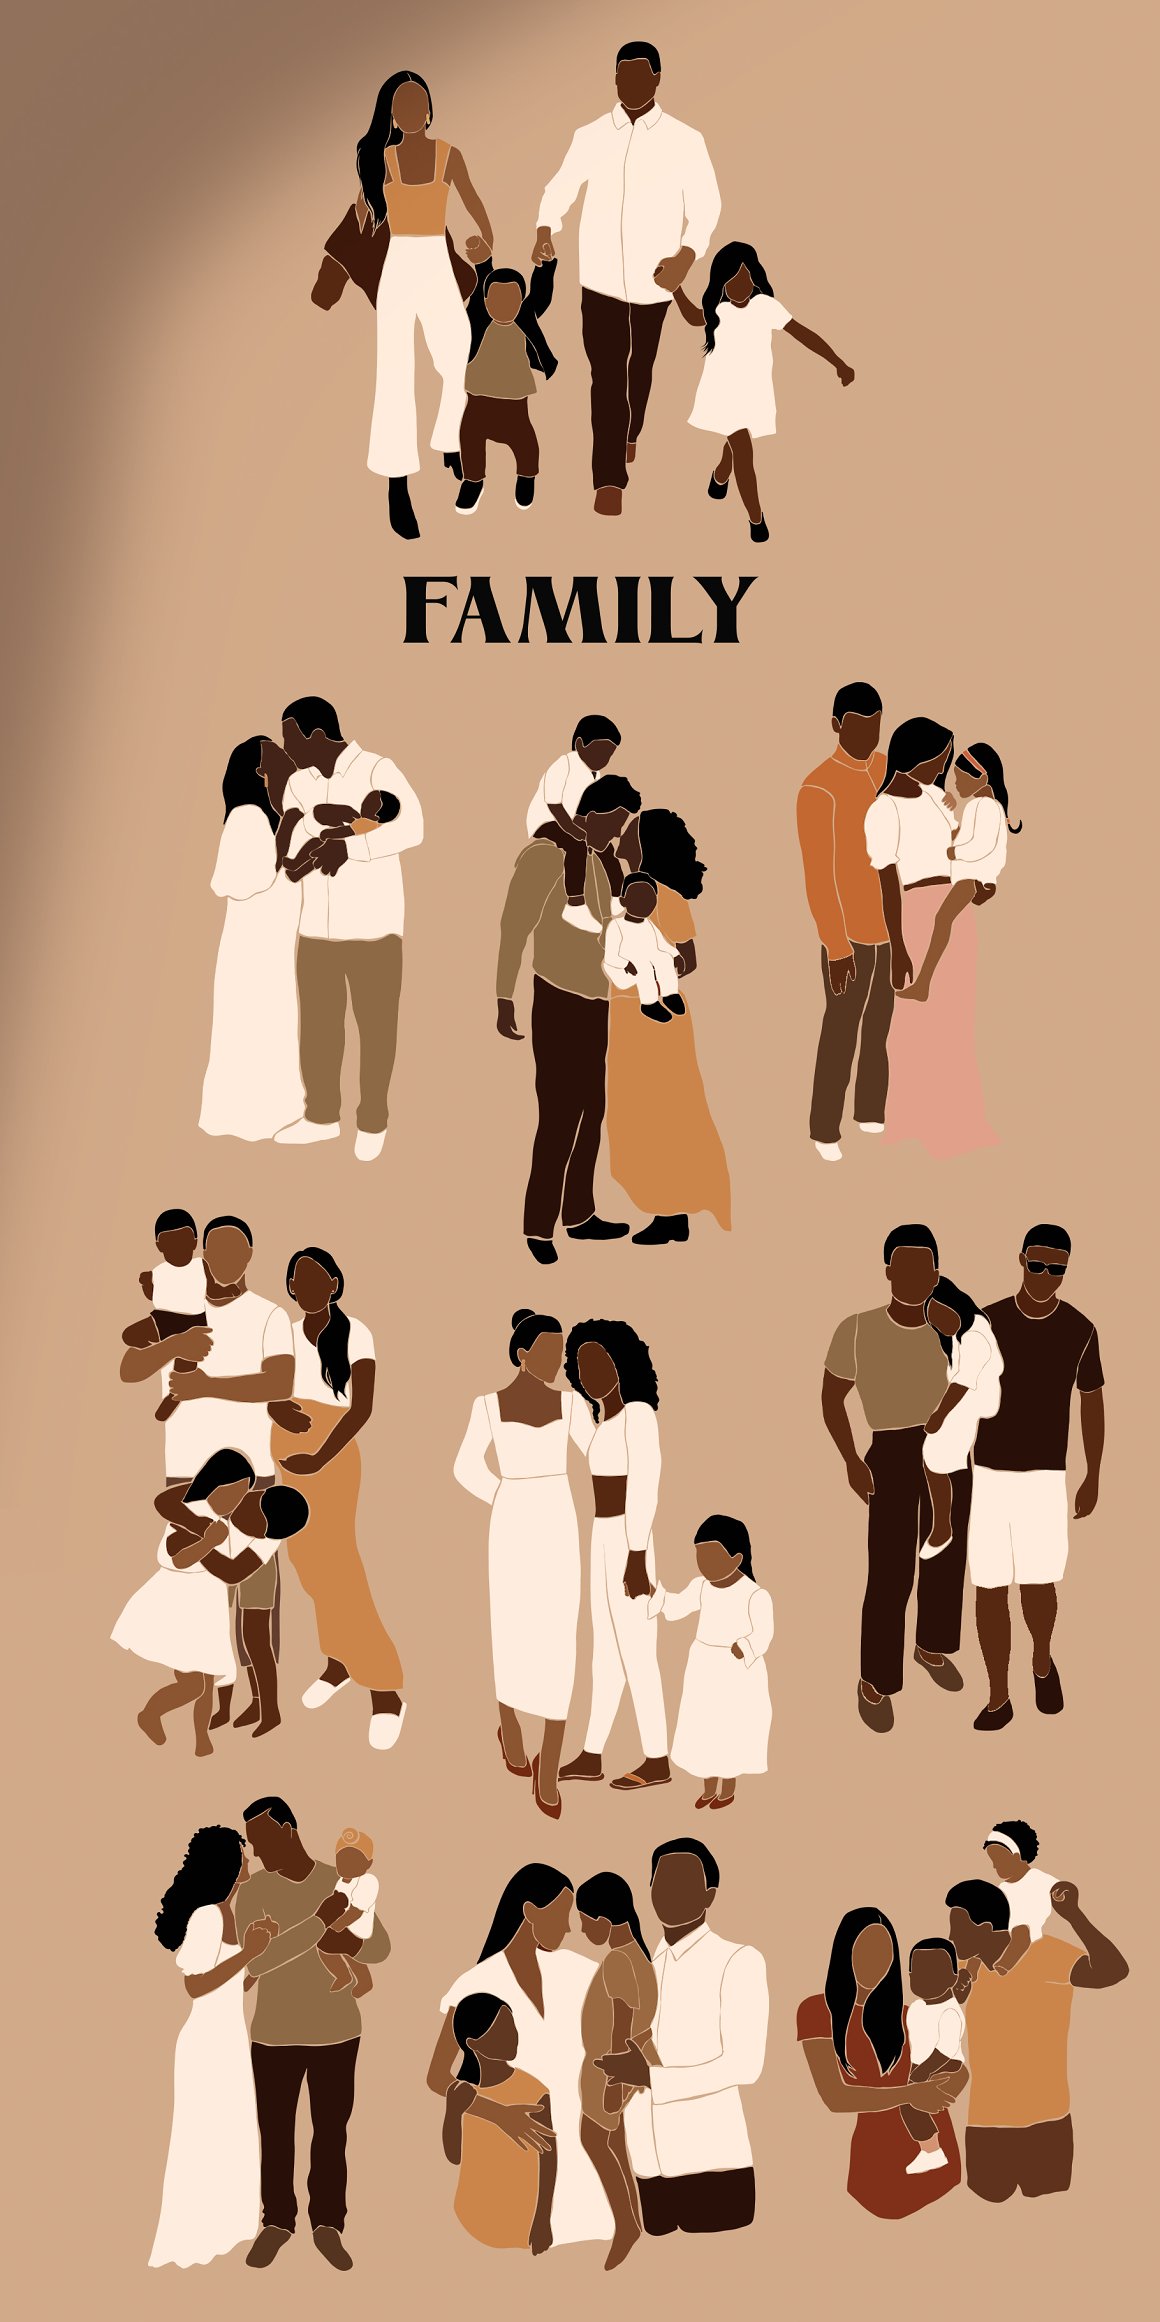 10 different family illustrations on a pink background.